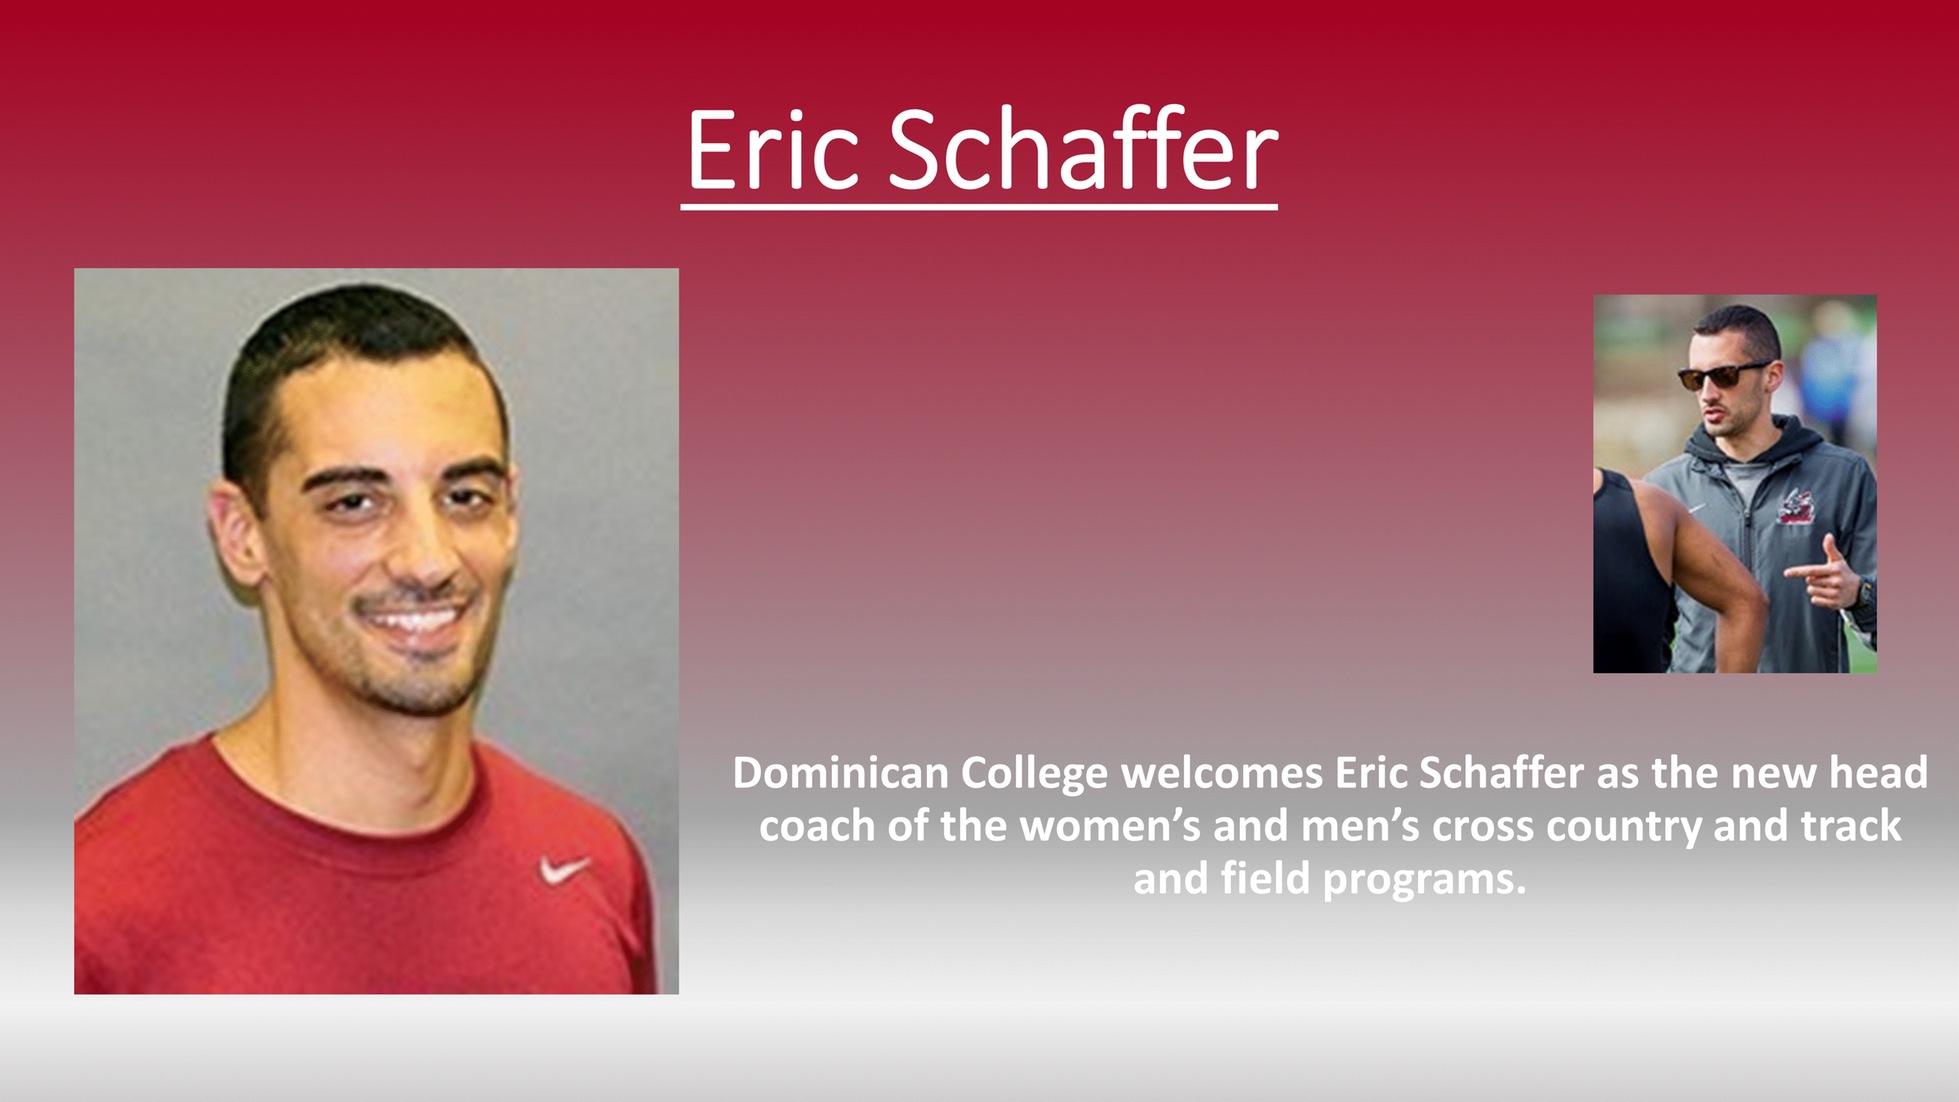 SCHAFFER NAMED WOMEN’S AND MEN’S CROSS COUNTRY AND TRACK AND FIELD COACH